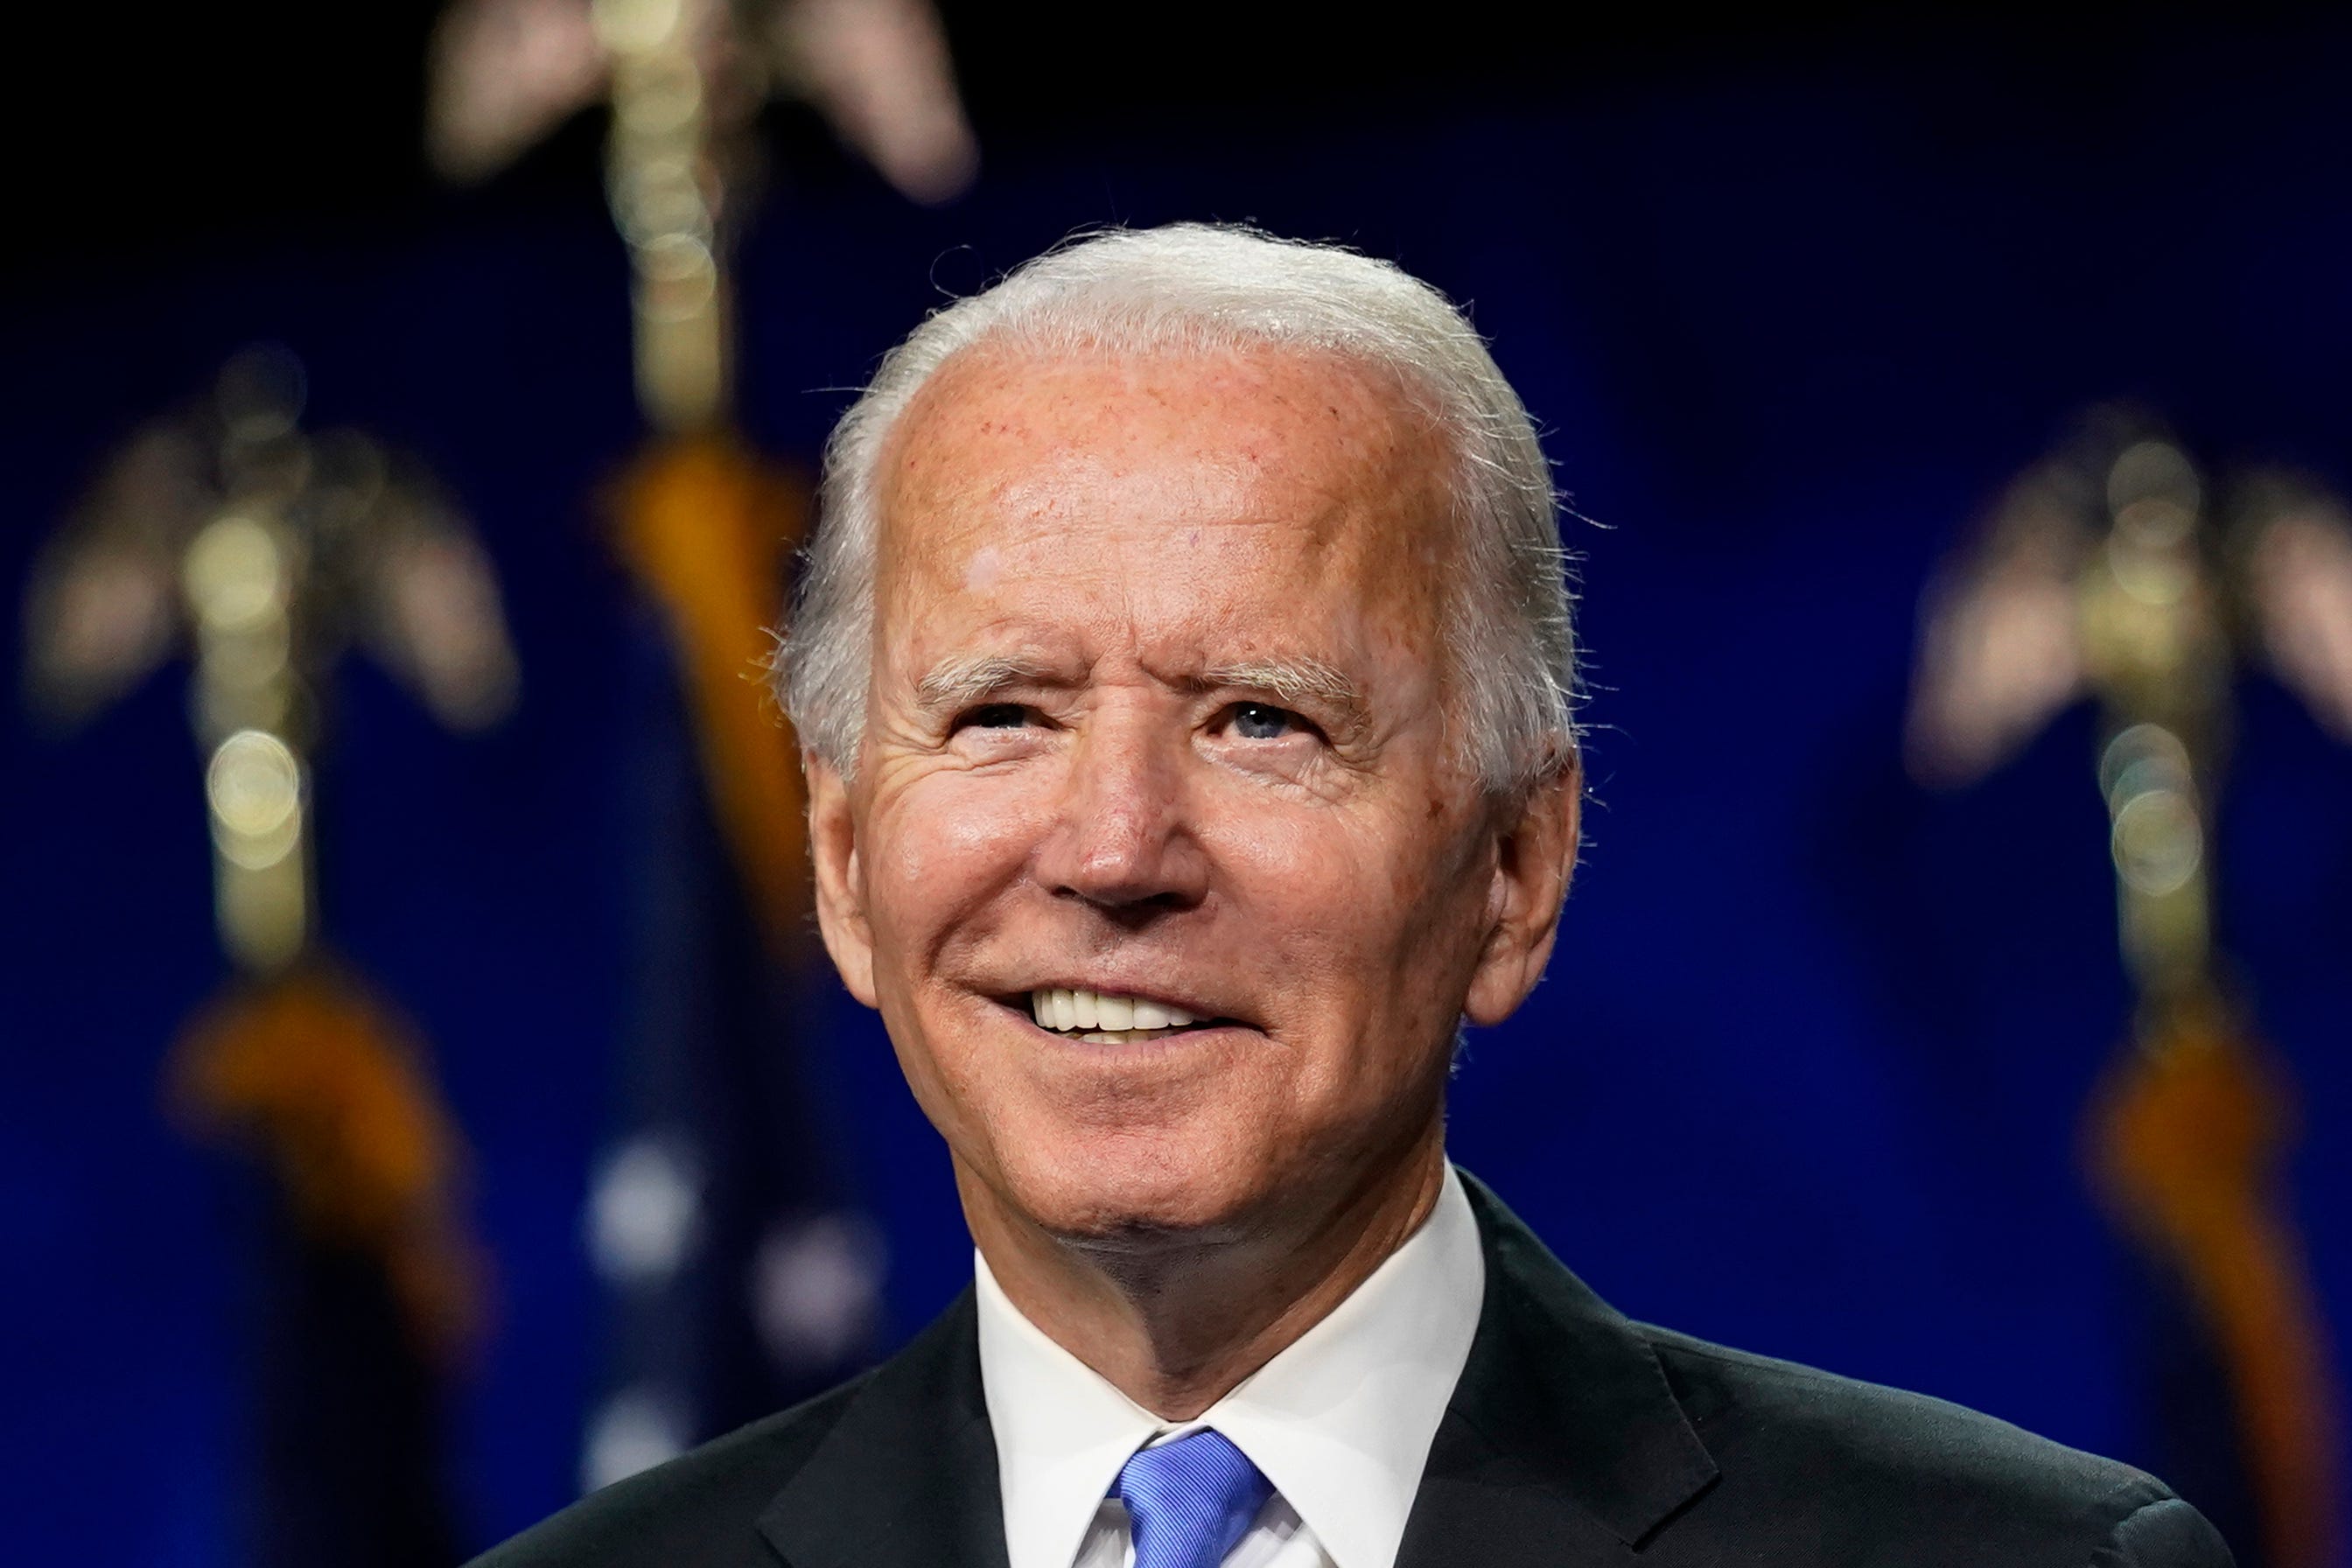 did joe biden buy a new corvette yet? - Biden|President|Joe|States|Delaware|Obama|Vice|Senate|Campaign|Election|Time|Administration|House|Law|People|Years|Family|Year|Trump|School|University|Senator|Office|Party|Country|Committee|Act|War|Days|Climate|Hunter|Health|America|State|Day|Democrats|Americans|Documents|Care|Plan|United States|Vice President|White House|Joe Biden|Biden Administration|Democratic Party|Law School|Presidential Election|President Joe Biden|Executive Orders|Foreign Relations Committee|Presidential Campaign|Second Term|47Th Vice President|Syracuse University|Climate Change|Hillary Clinton|Last Year|Barack Obama|Joseph Robinette Biden|U.S. Senator|Health Care|U.S. Senate|Donald Trump|President Trump|President Biden|Federal Register|Judiciary Committee|Presidential Nomination|Presidential Medal